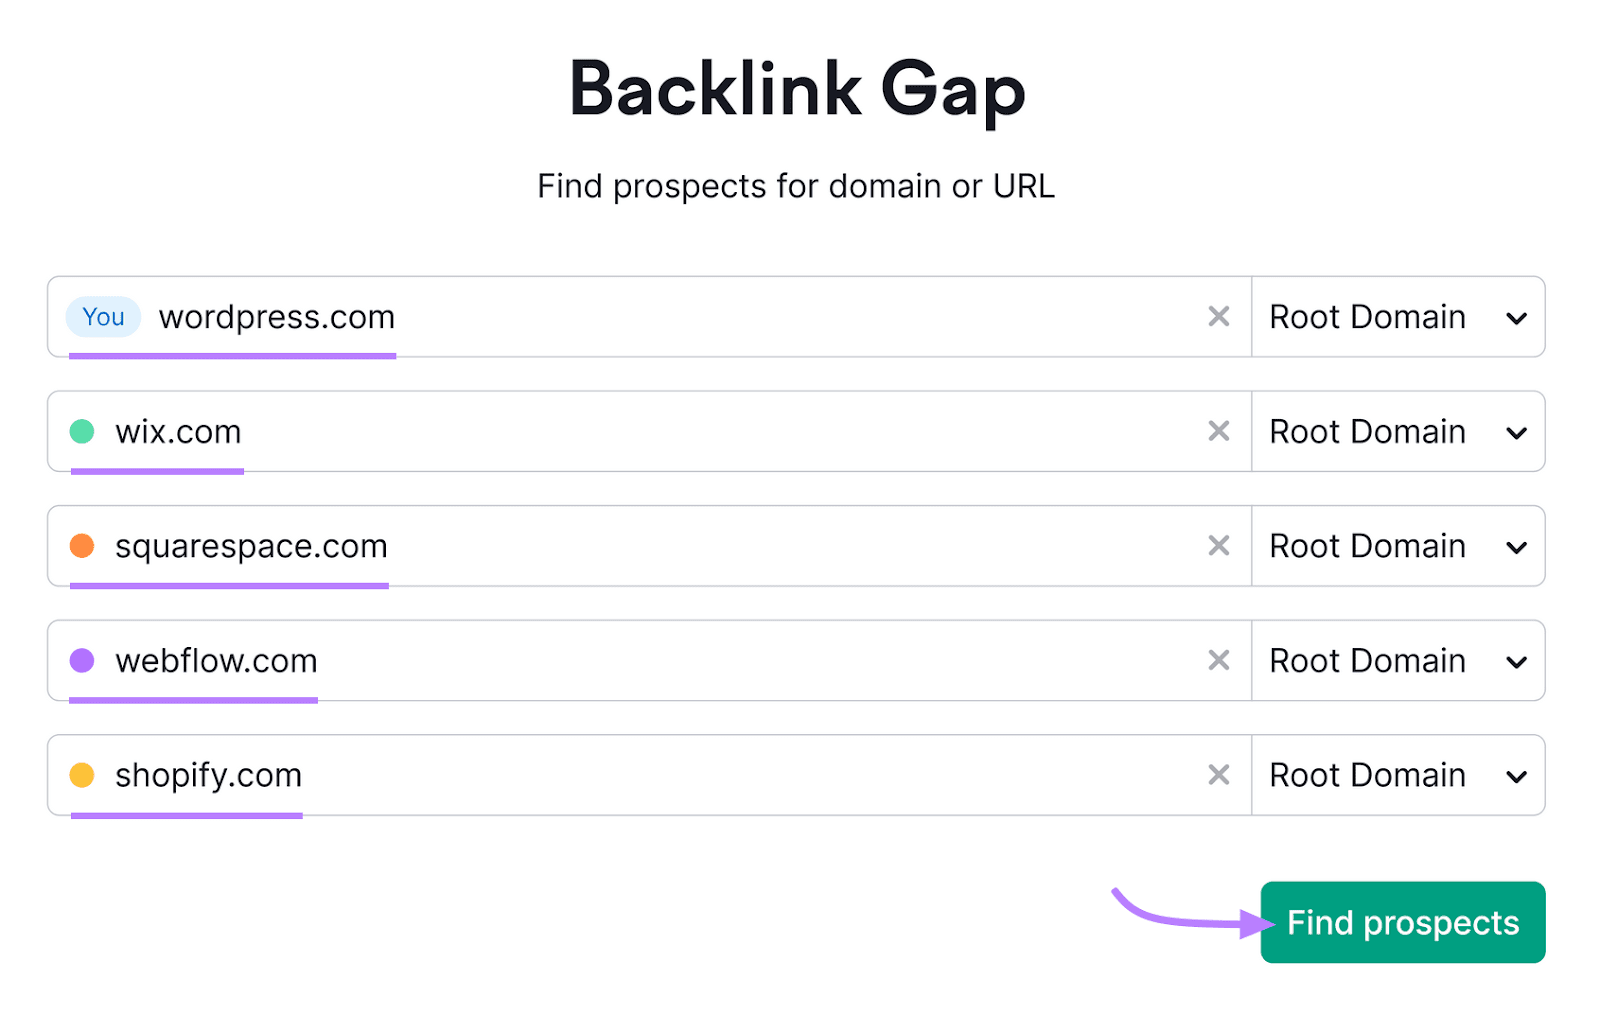 Backlink Gap with wordpress.com entered as the domain along with 4 competitors.